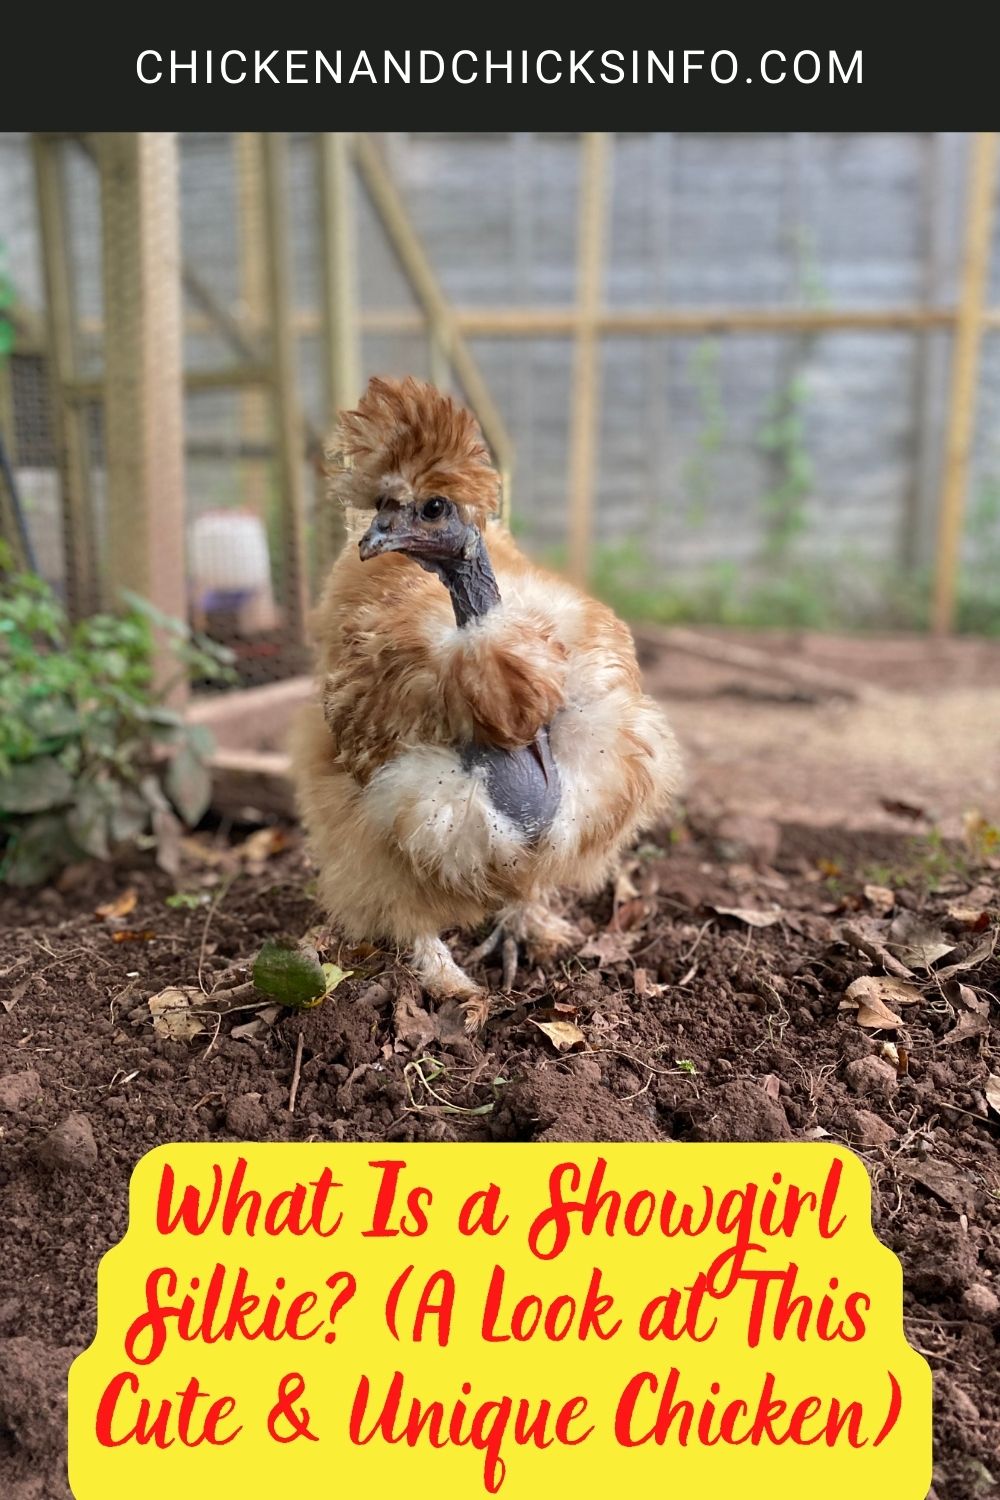 What Is a Showgirl Silkie? (A Look at This Cute & Unique Chicken) poster.
